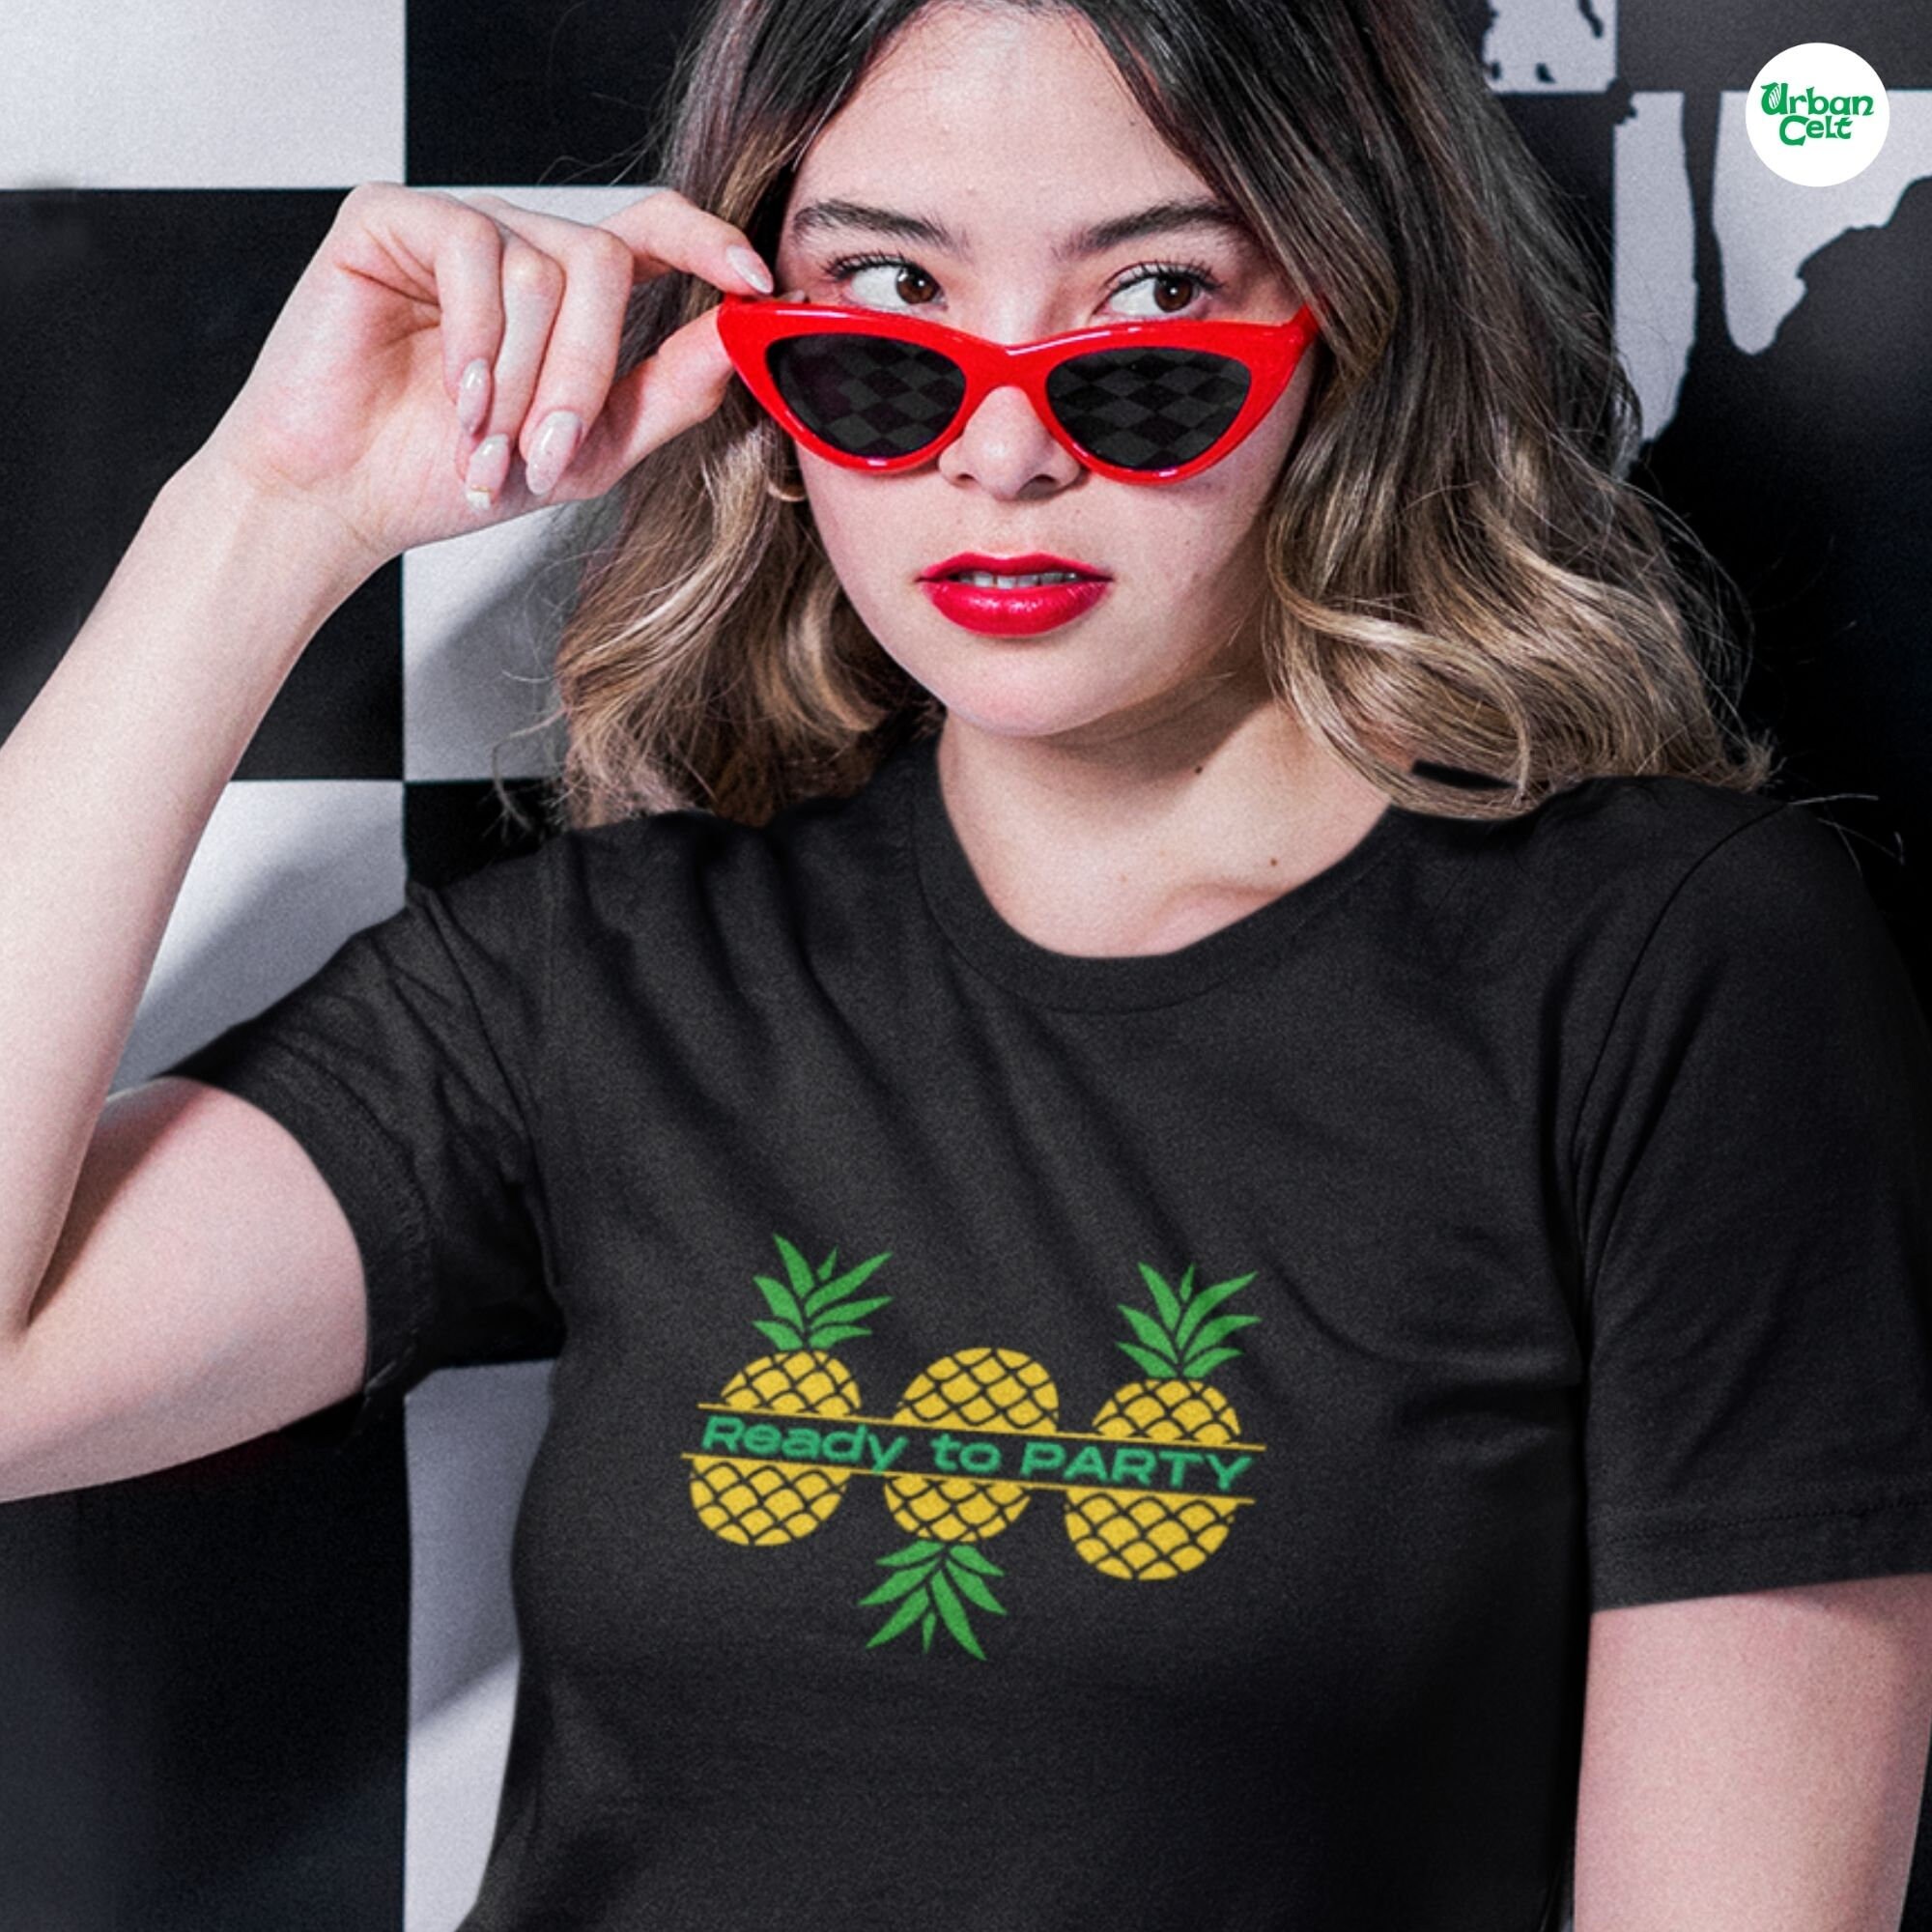 Adult Party Pineapple Shirt Adult Lifestyle Pineapple Shirt